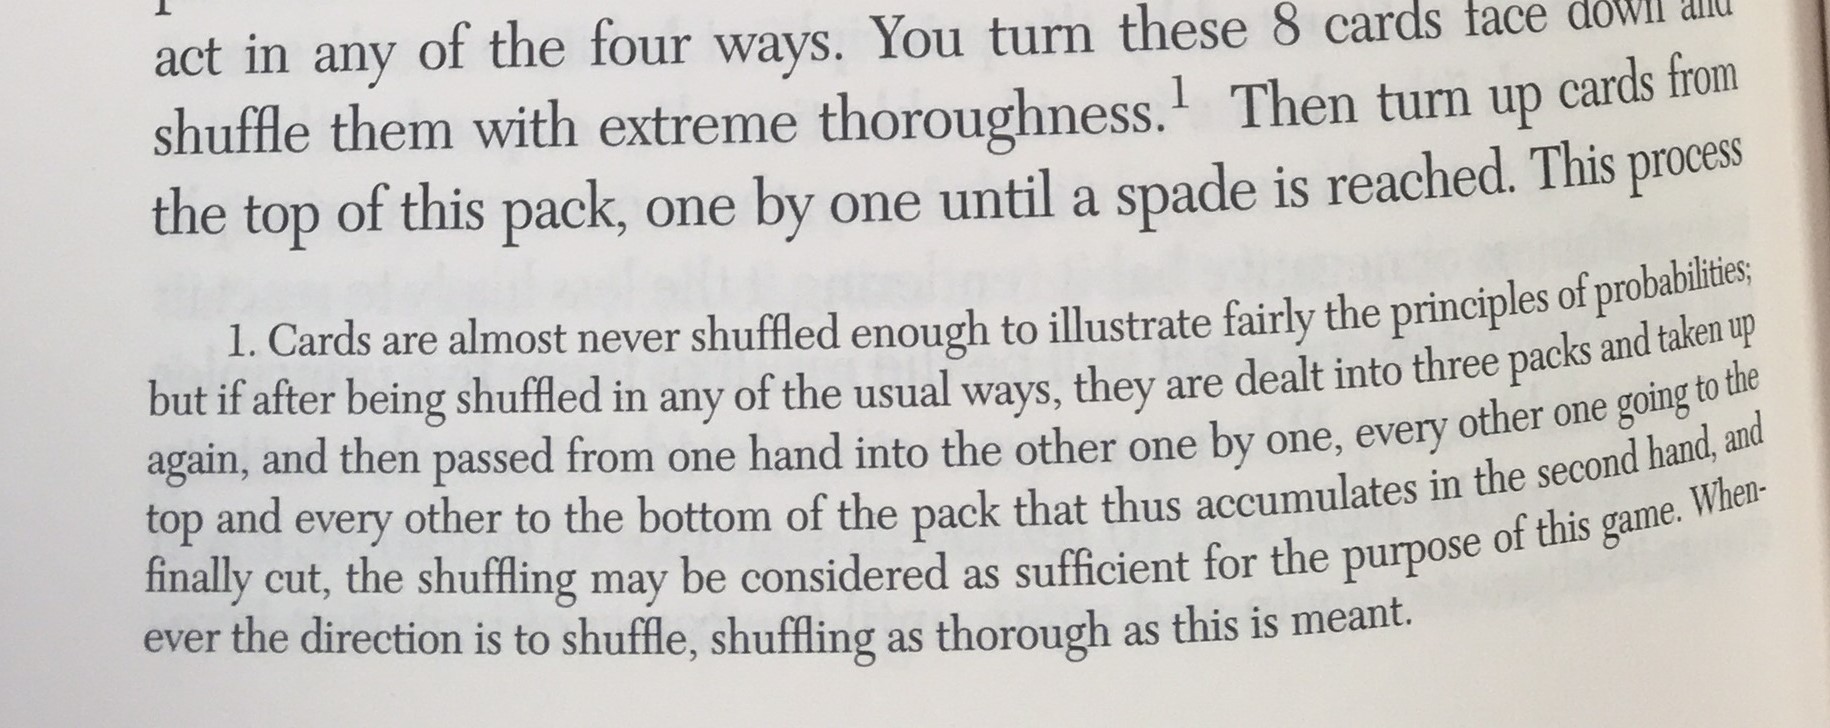 André de Tienne pointed us to this passage on Peirce’s card shuffling method in Writings of C. S. Pierce, 1886-1890 (p. 192).